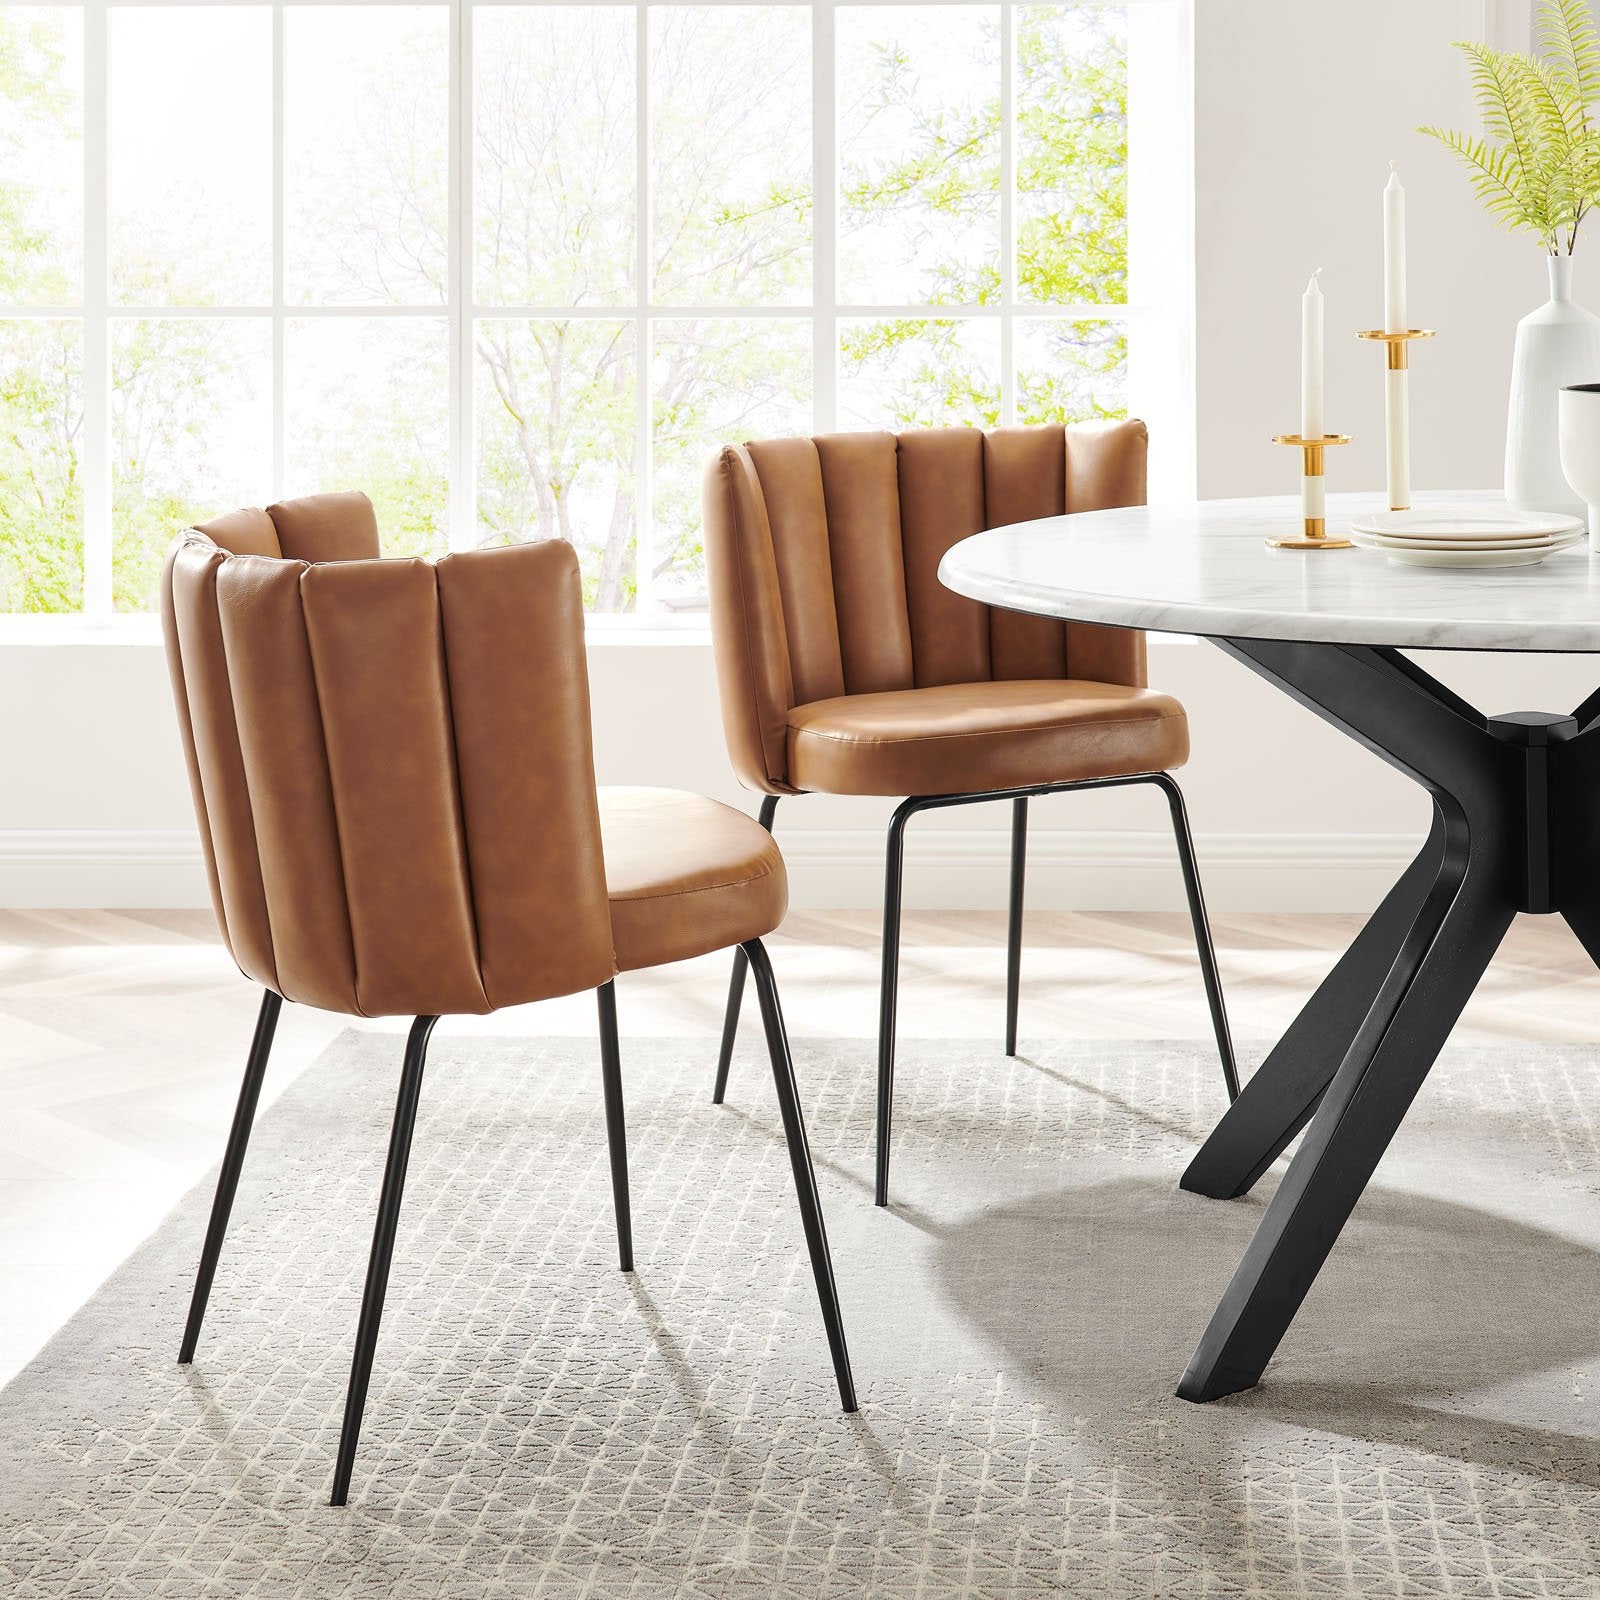 Virtue Vegan Leather Dining Chair Set of 2 - East Shore Modern Home Furnishings